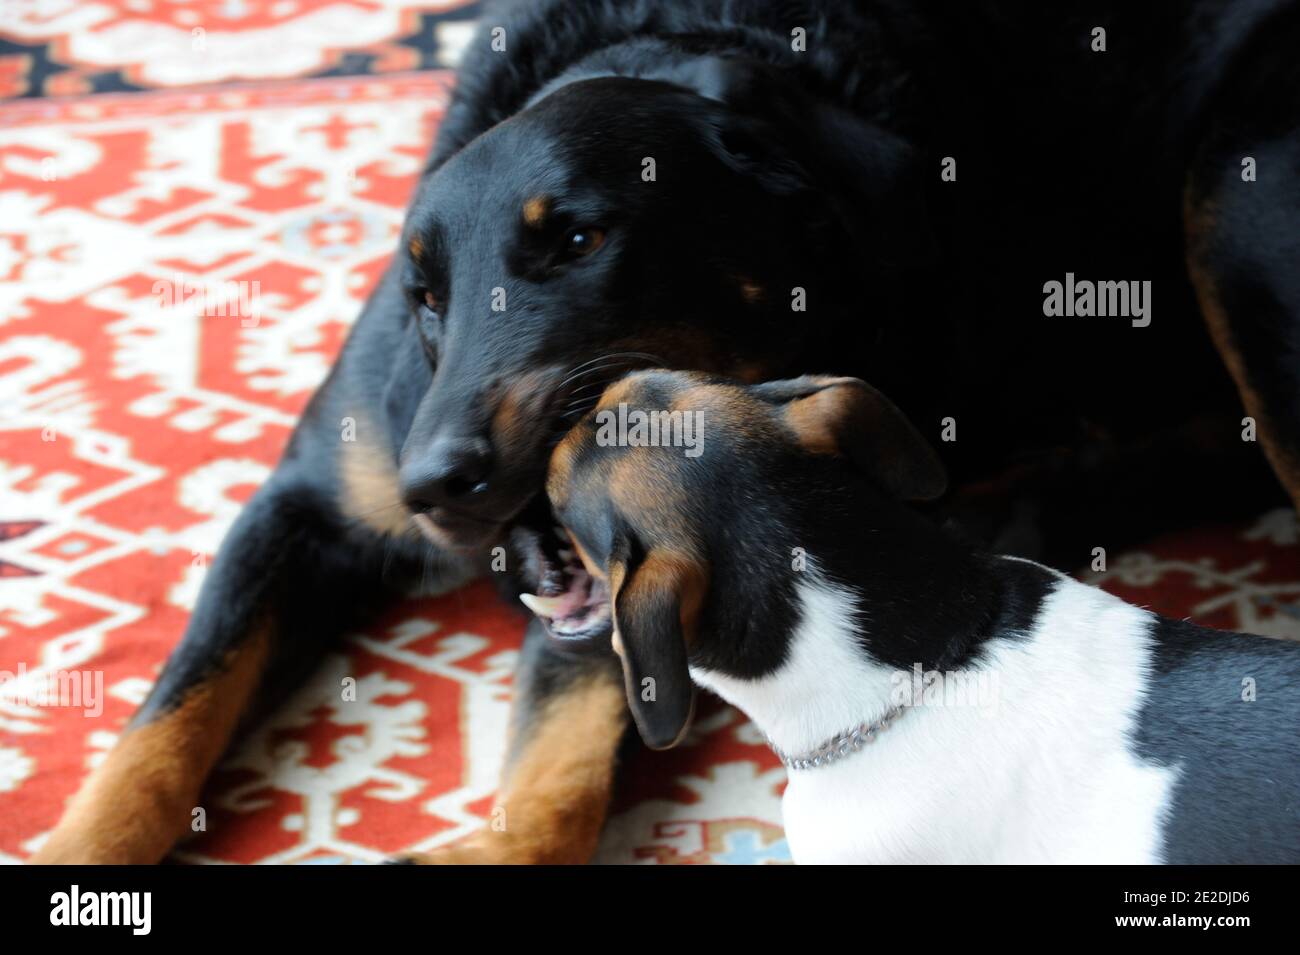 Sheepdogs ' beauceron' and Jack Russell puppy. The Beauceron is a guard dog  and herding dog breed falling into the working dog category whose origins  lie in the plains of Northern France.